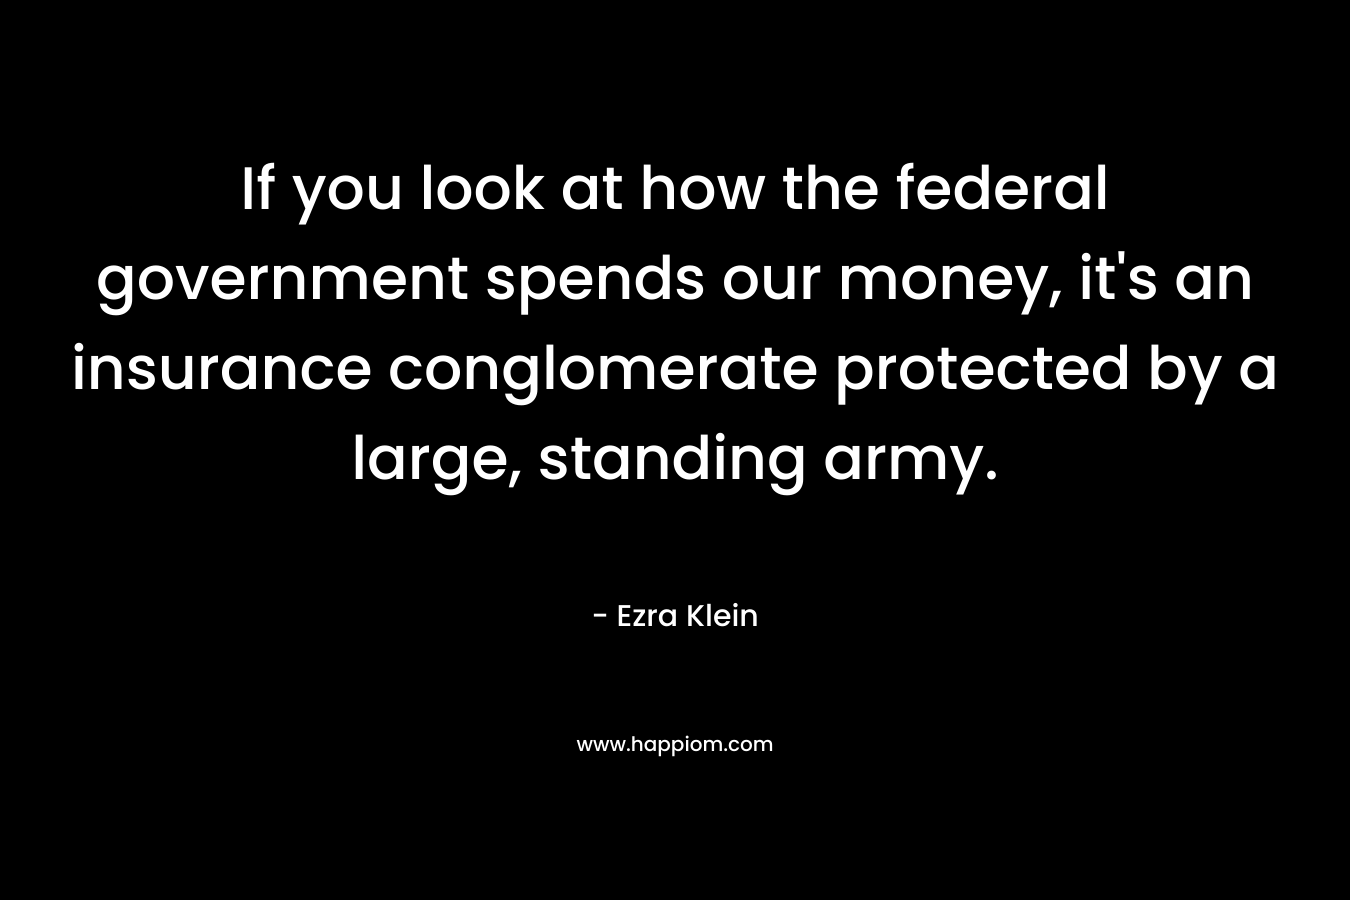 If you look at how the federal government spends our money, it's an insurance conglomerate protected by a large, standing army.